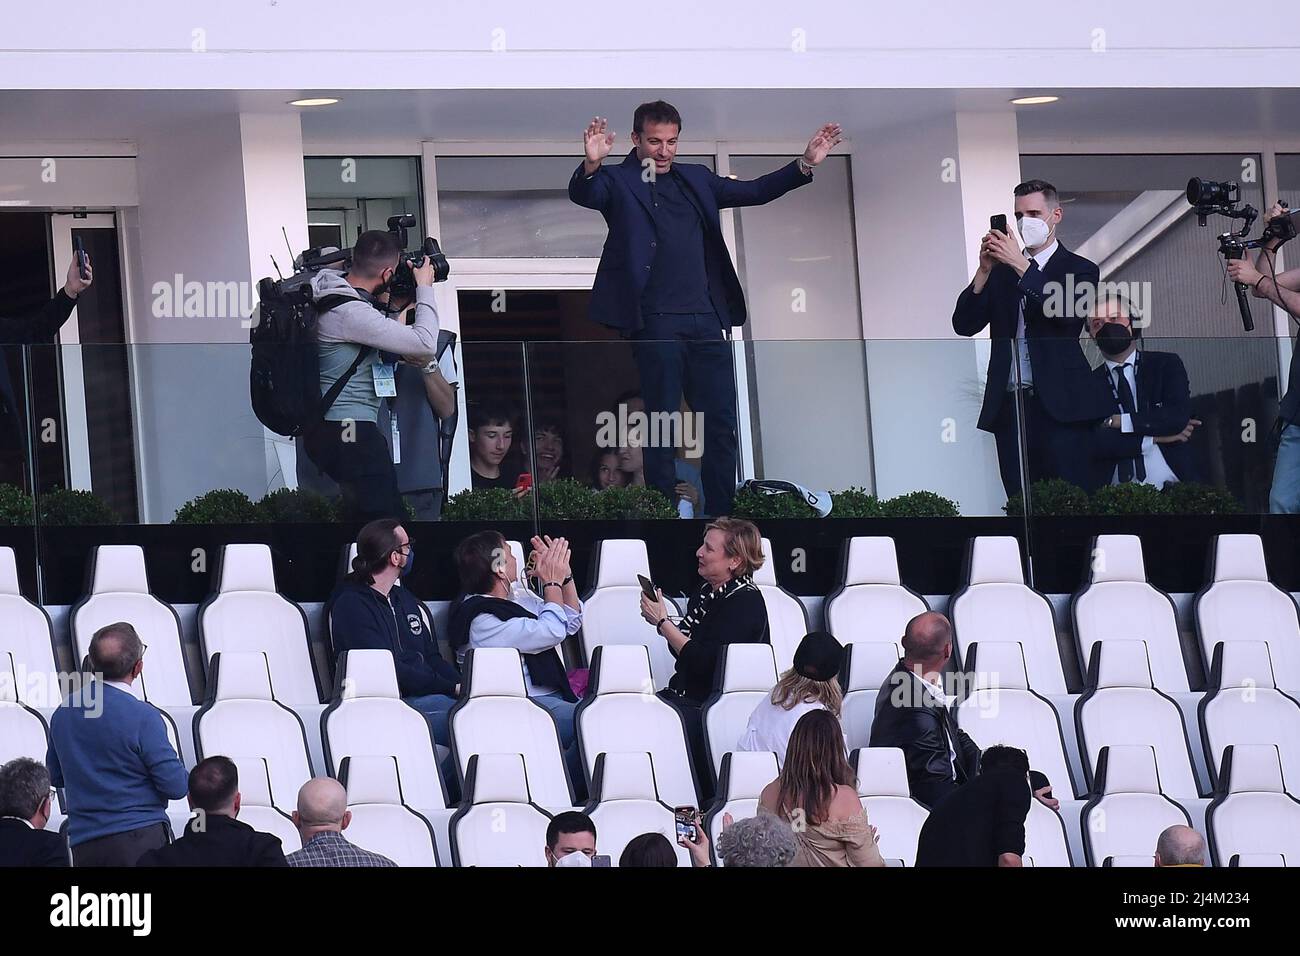 Torino, Italy. 16th Apr, 2022. Alessandro Del Piero waves during the Serie A 2021/2022 football match between Juventus FC and Bologna FC at Juventus stadium in Torino (Italy), April 16th, 2022. Photo Federico Tardito/Insidefoto Credit: insidefoto srl/Alamy Live News Stock Photo